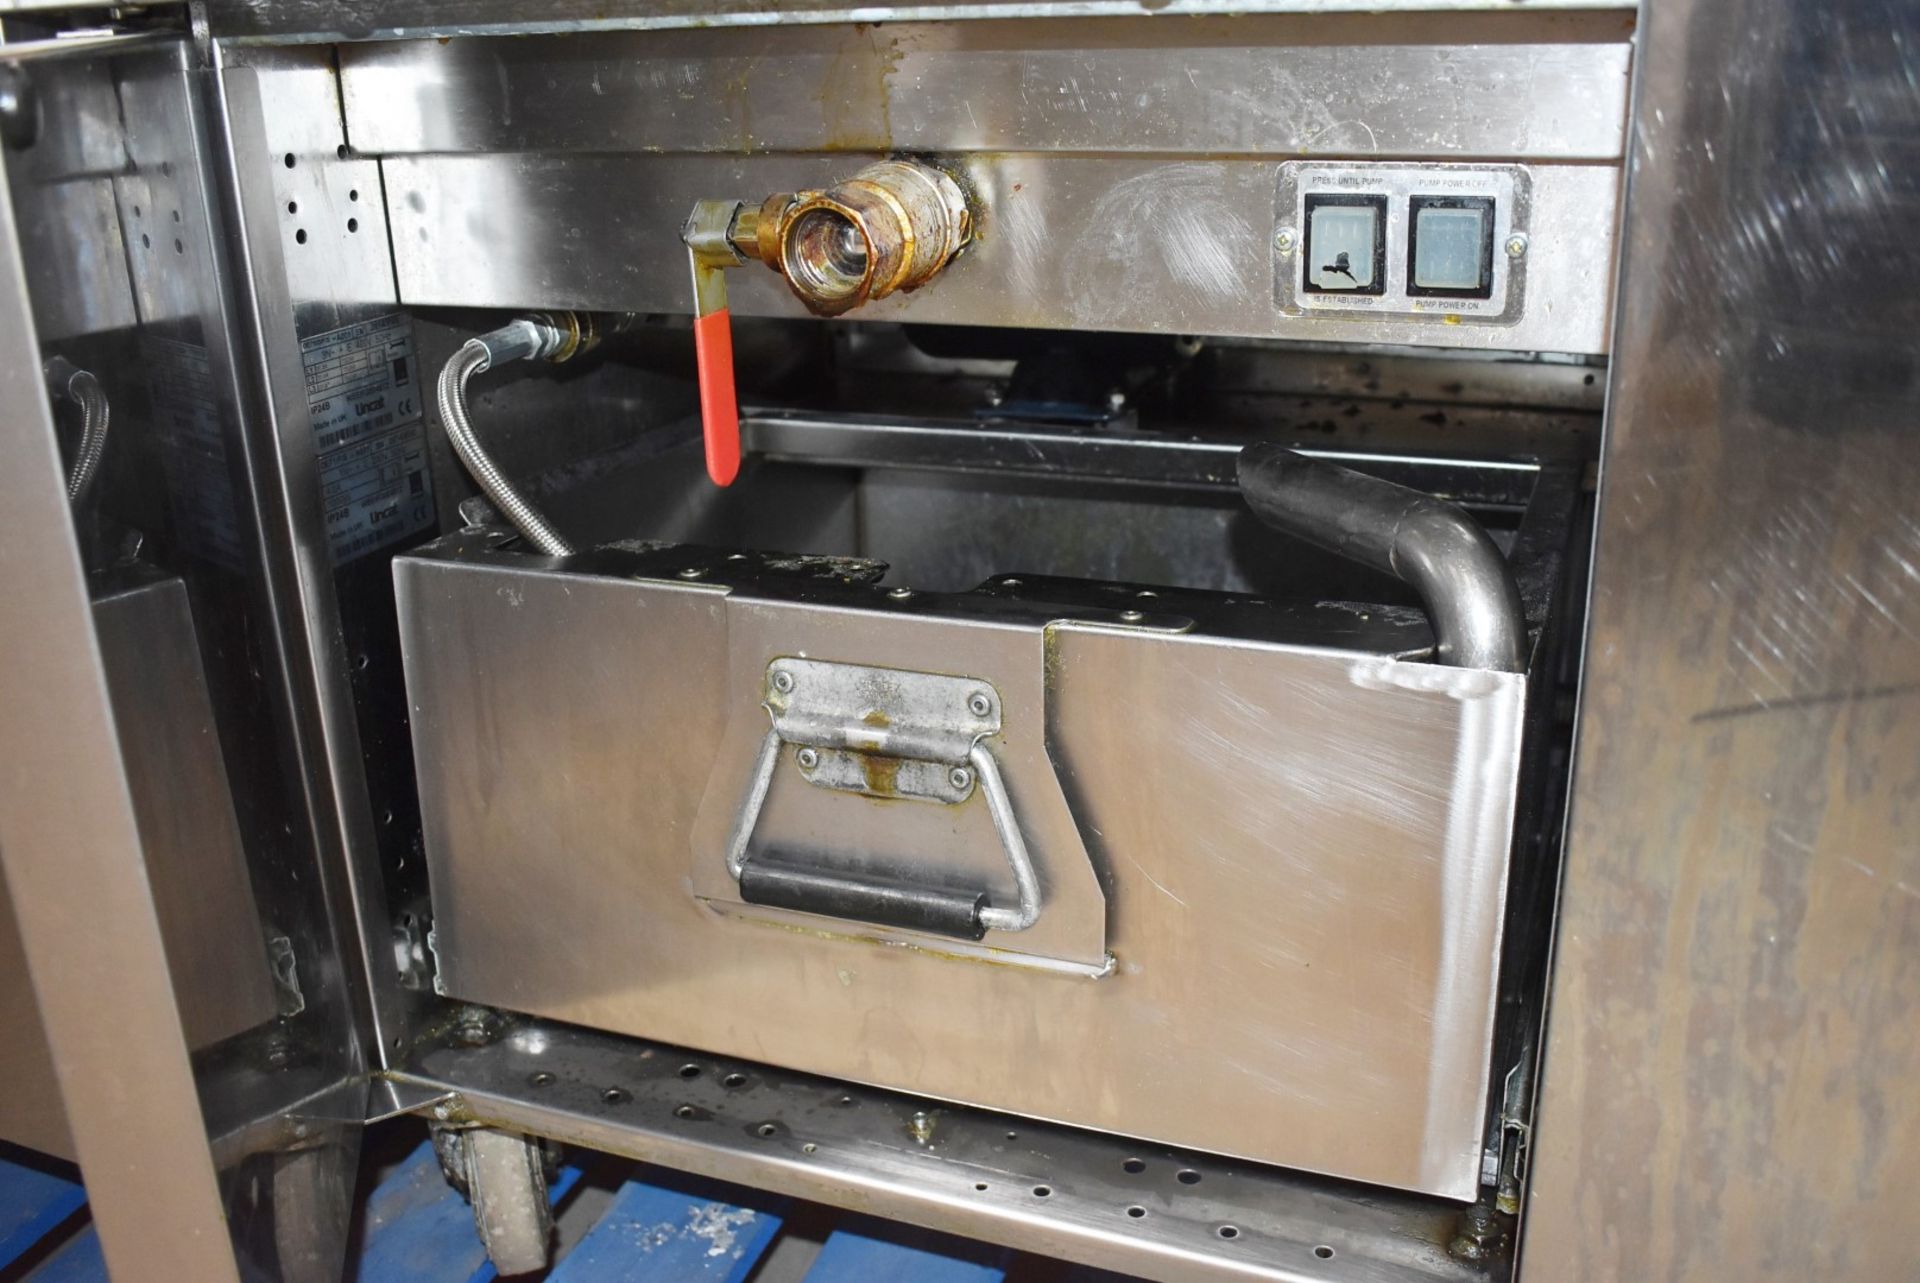 1 x Lincat Opus 700 OE7113 Single Large Tank Electric Fryer With Built In Filteration - 240V / 3PH P - Image 7 of 12